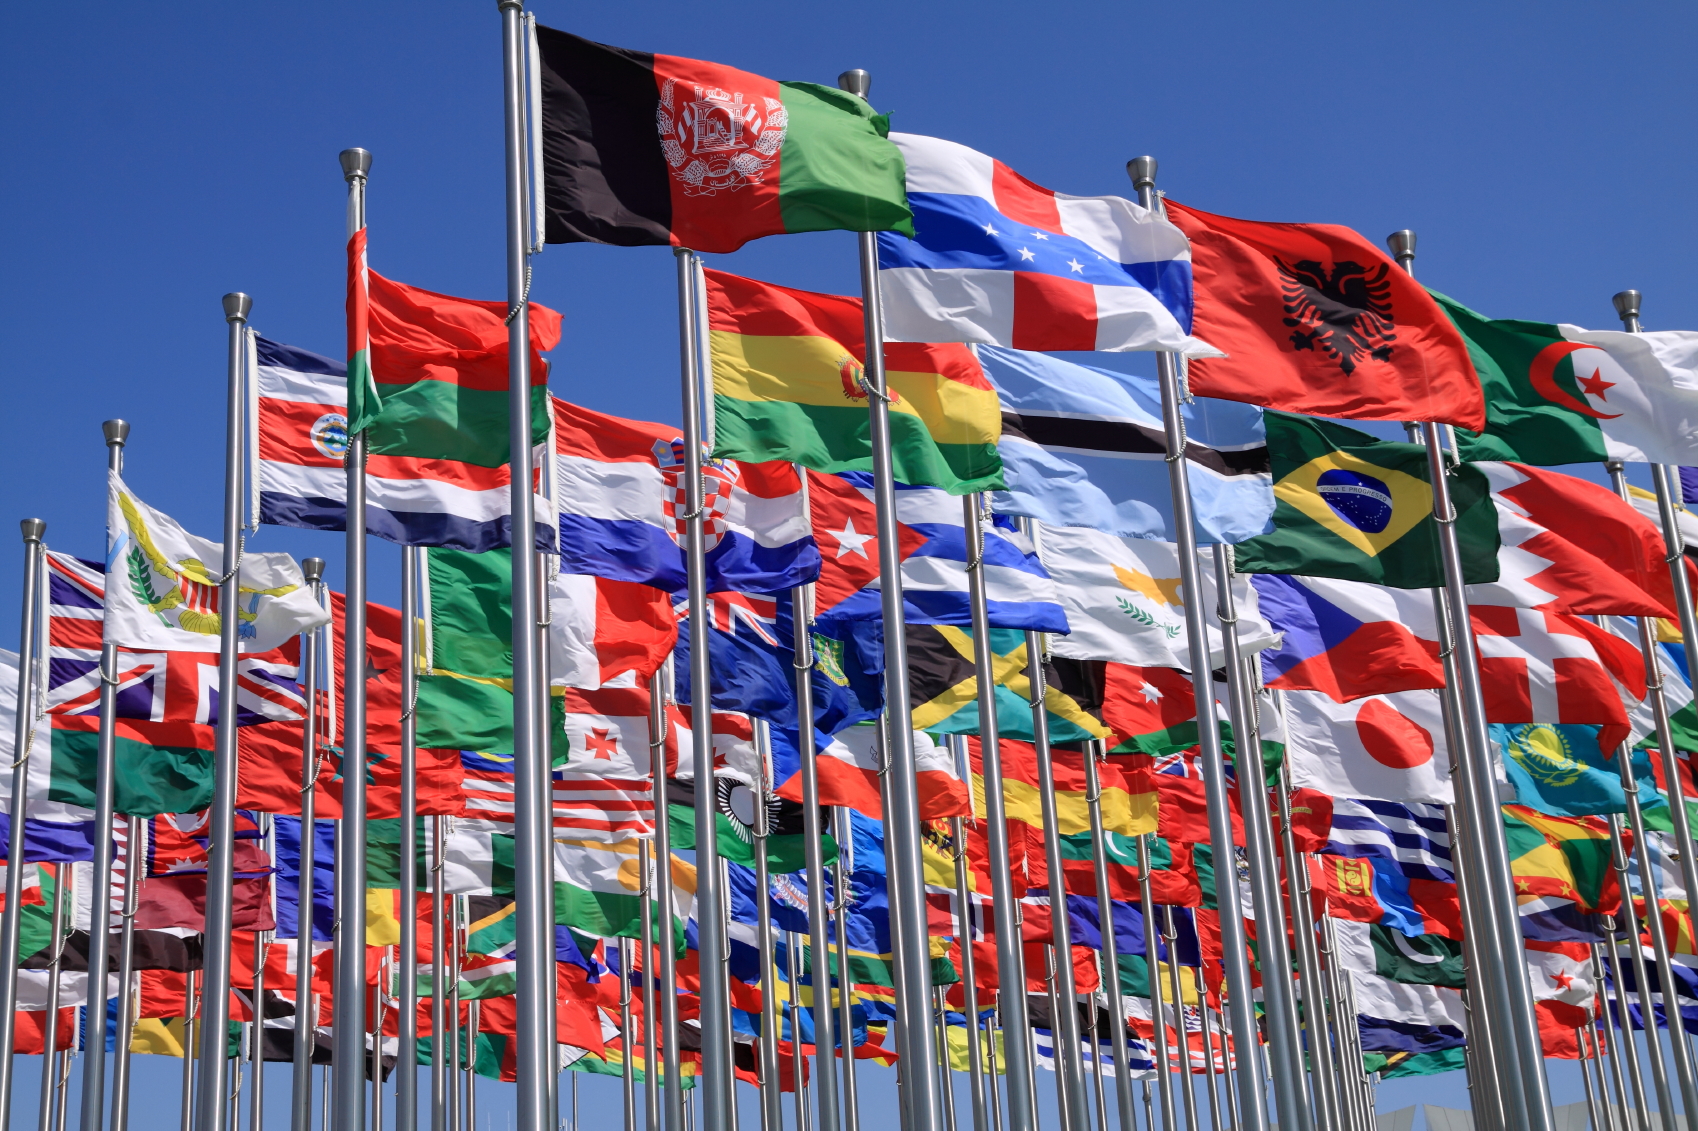 Why Don't We All Have a World Flag Flying? | Rick Schaefer MD